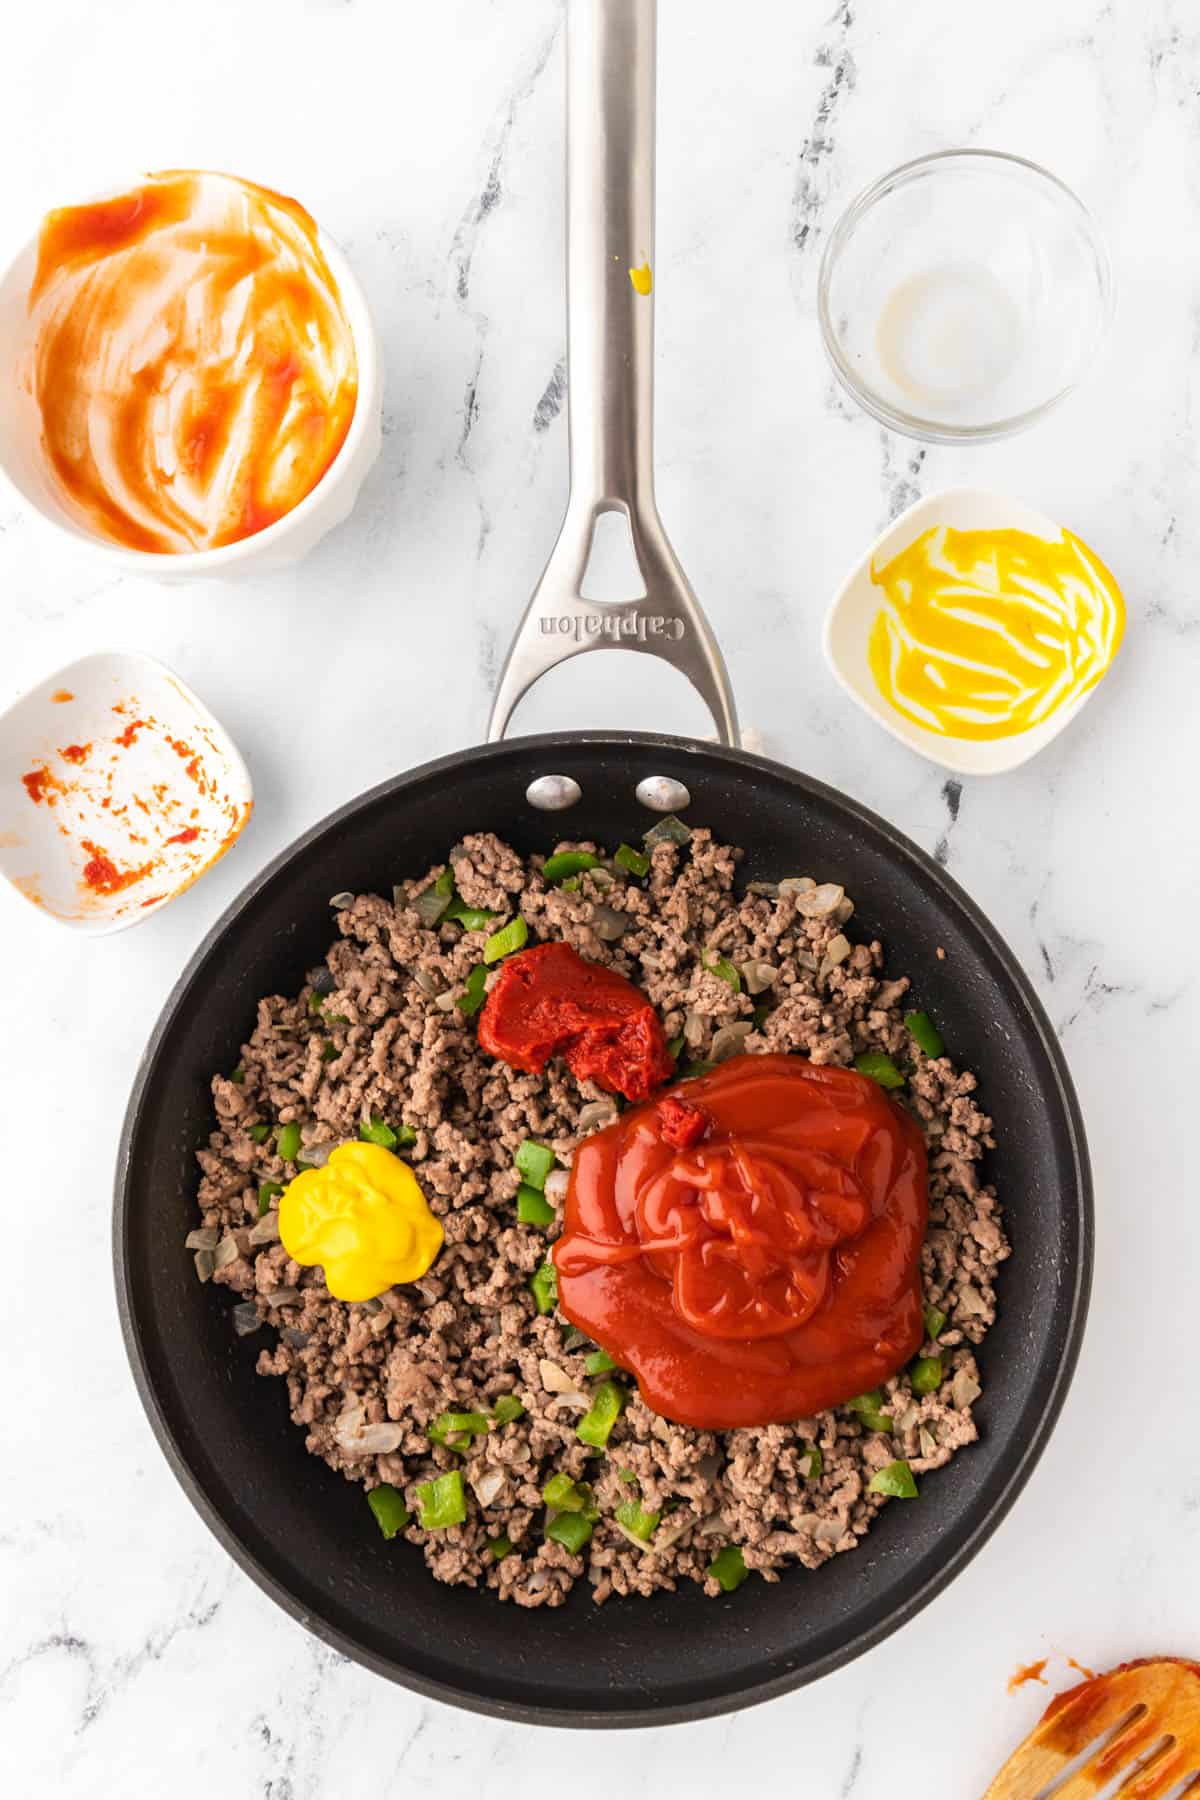 Skillet with homemade Sloppy Joes ingredients including cooked ground beef. Diced green onions are visible mixed in the meat, and ketchup, mustard and tomato sauce are visible on top of the meat mixture. Four empty bowls that have remnants of these ingredients are visible a the top of the image. 